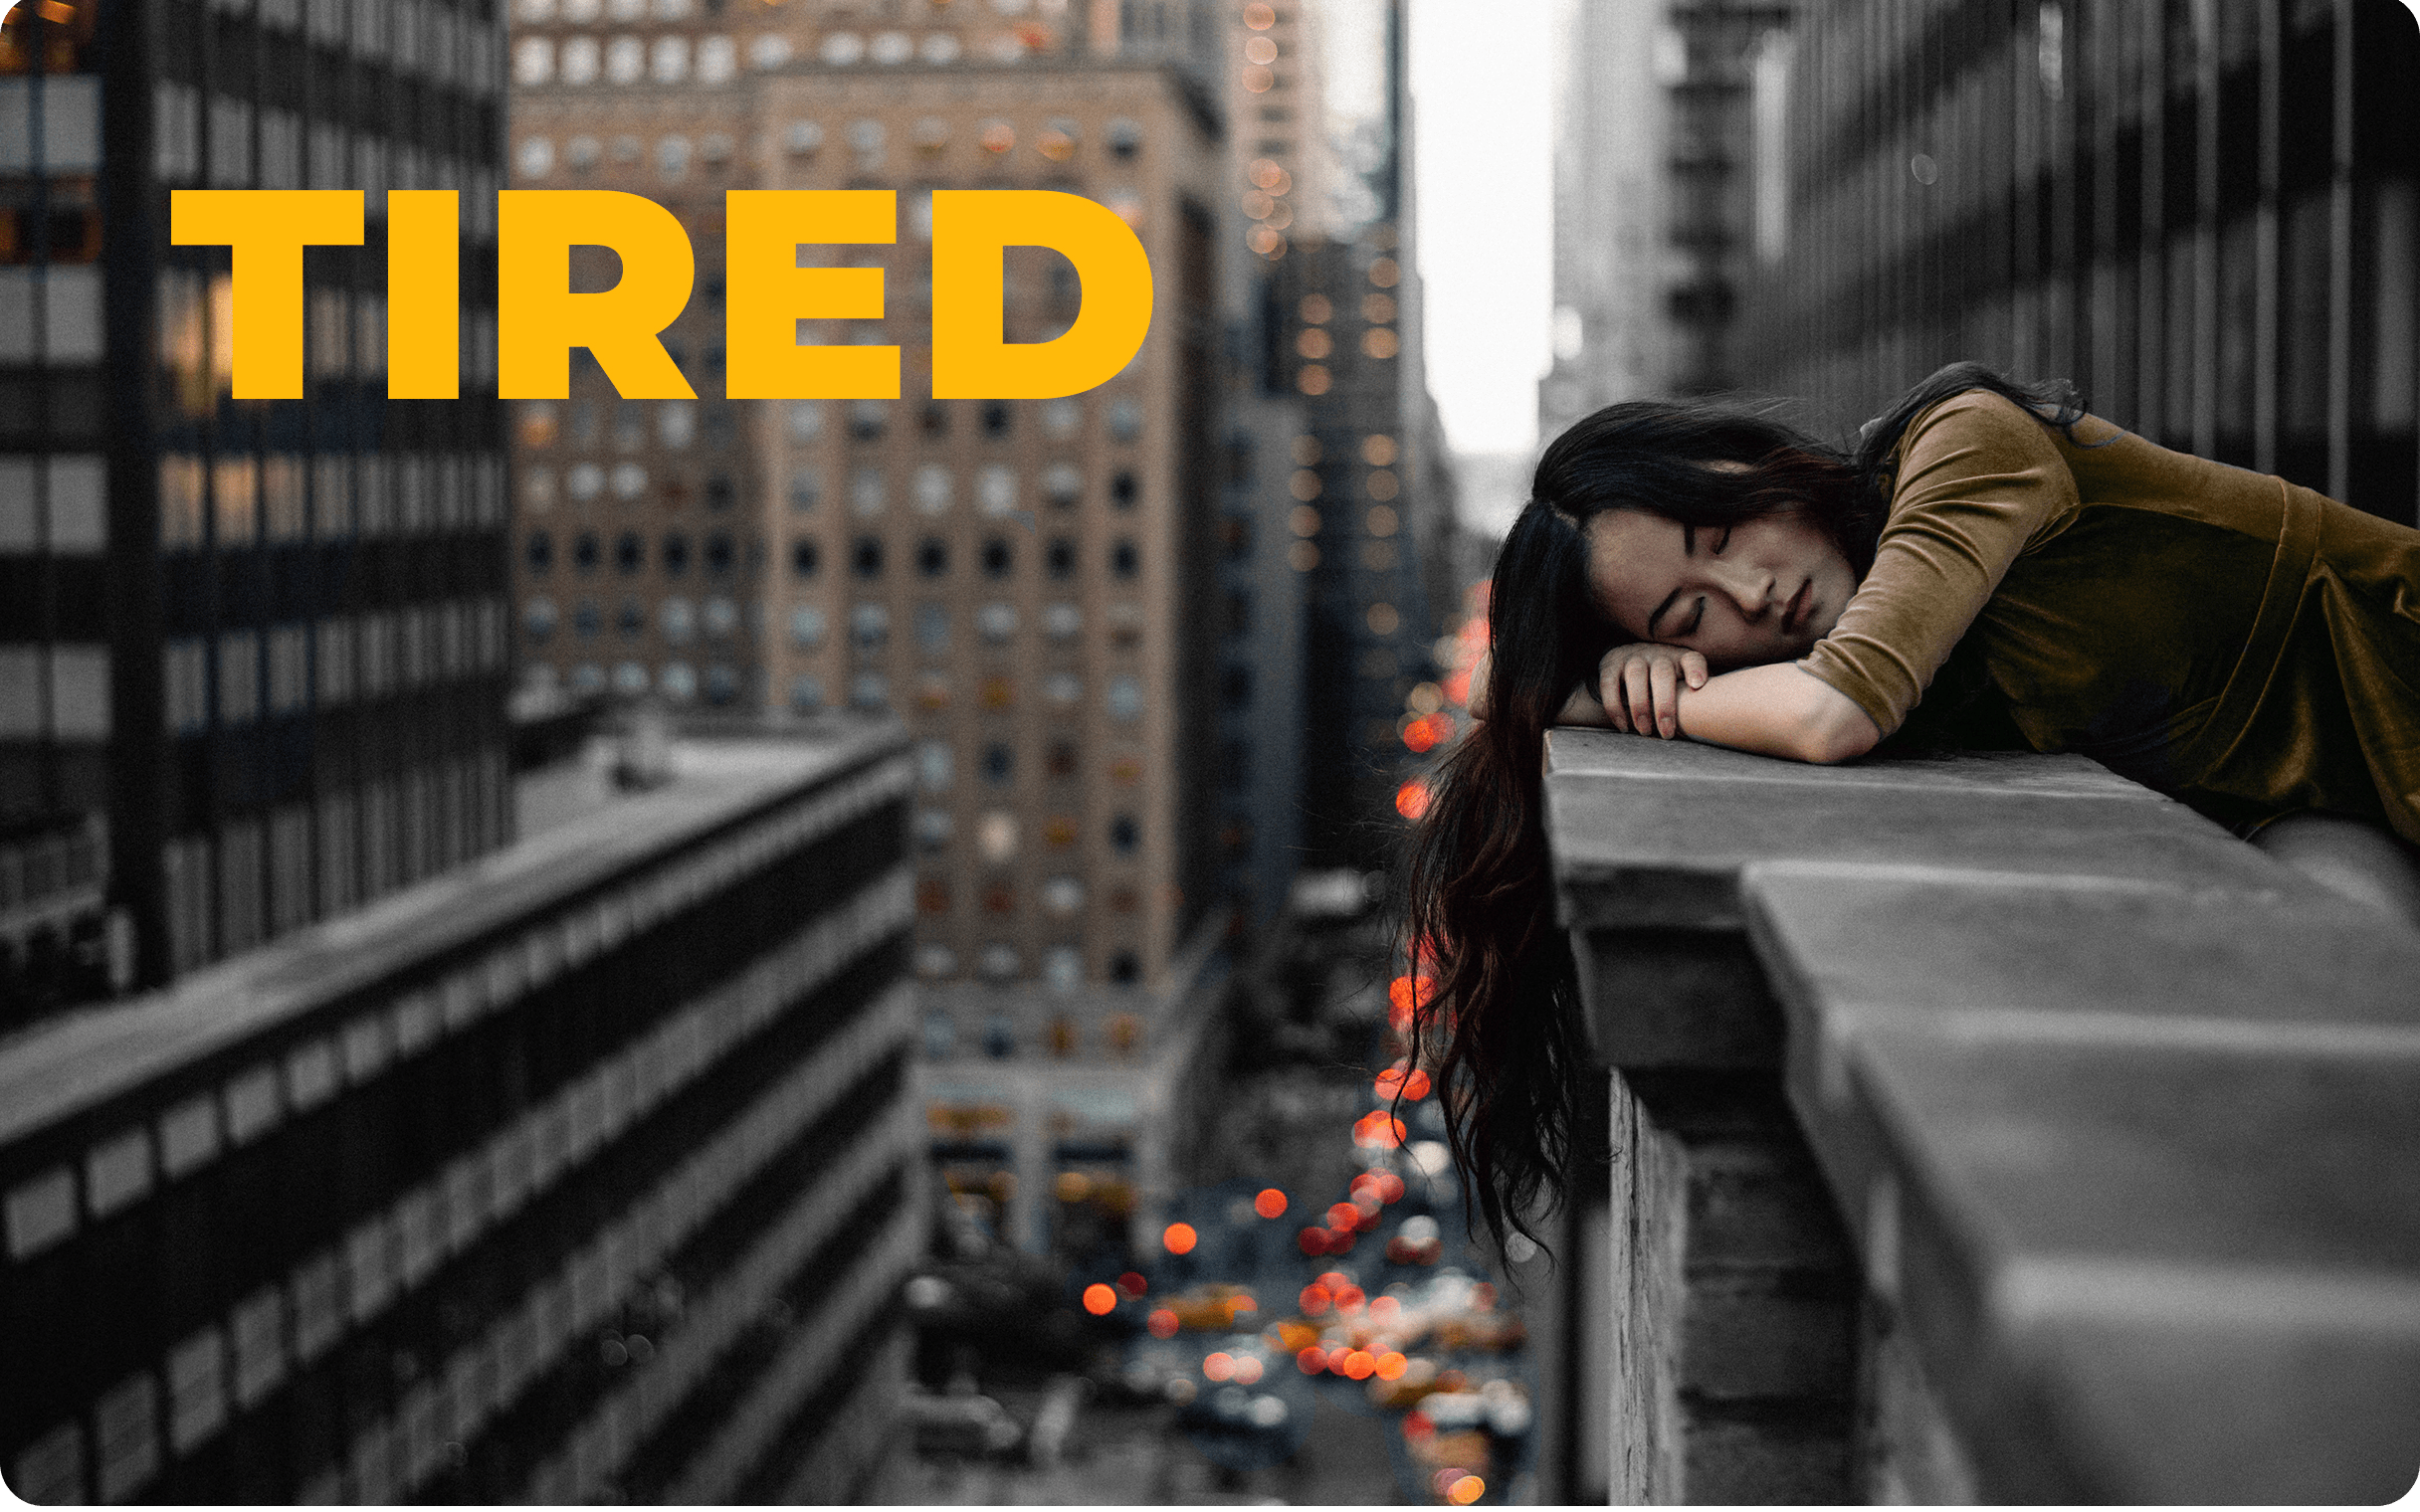 How to talk about feeling tired in English